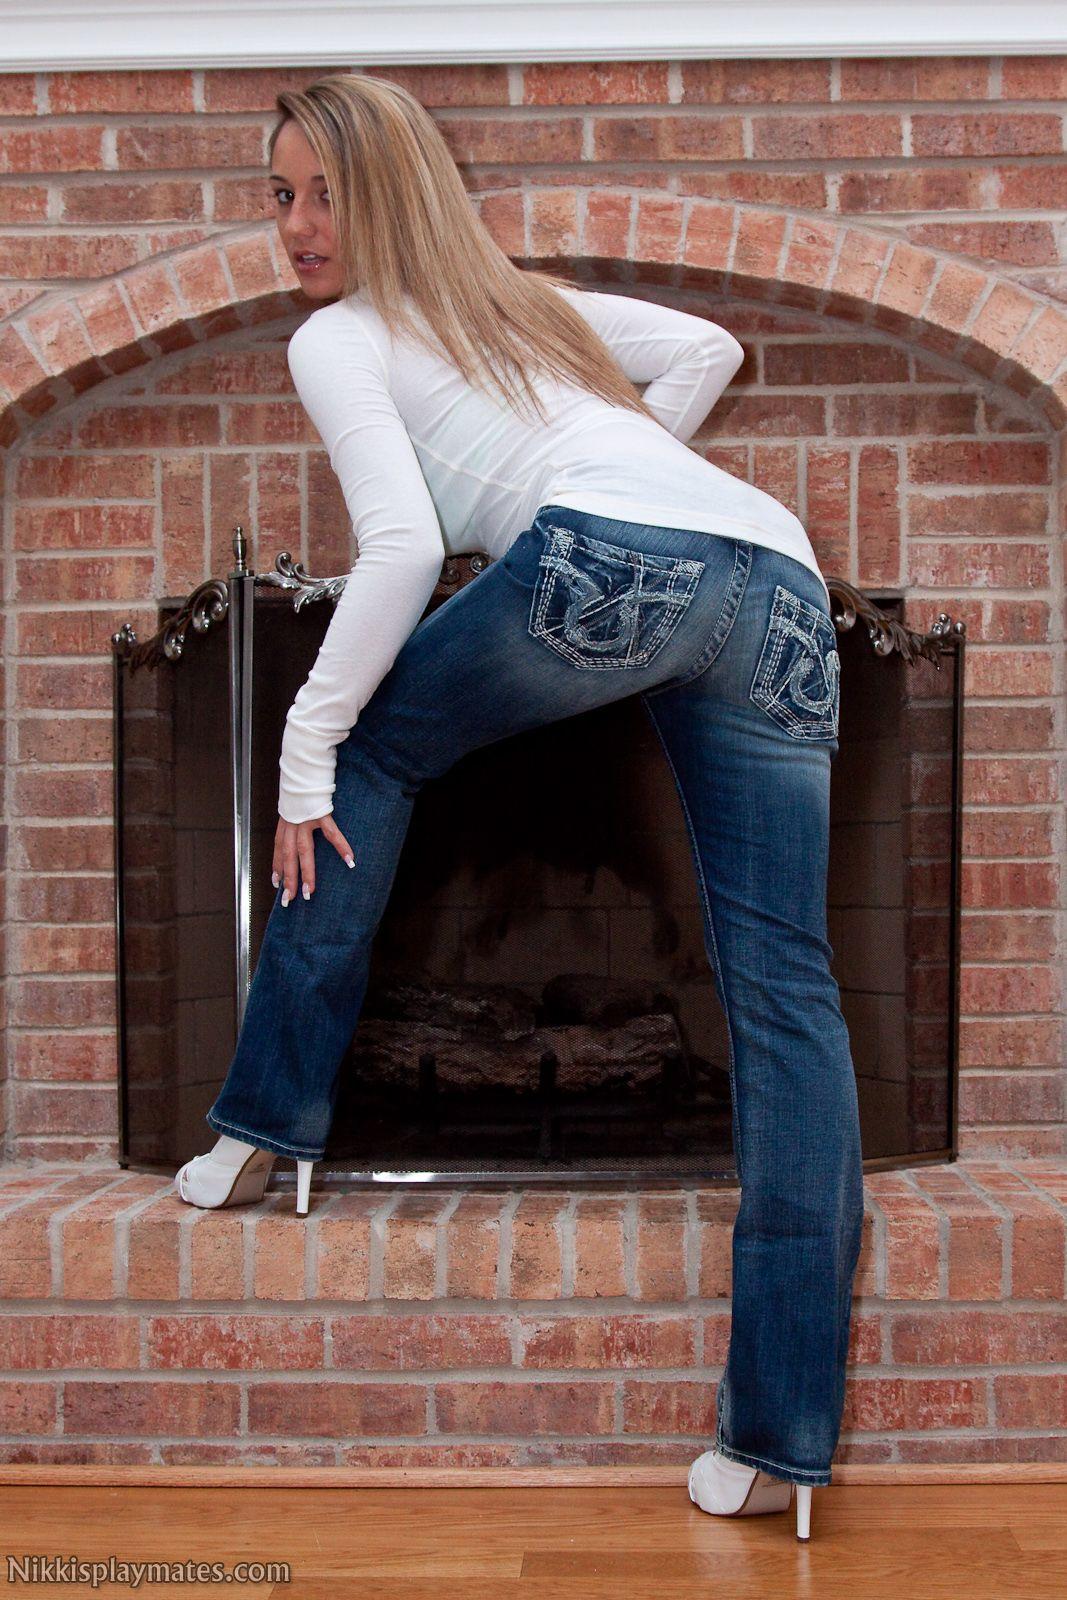 Pictures of teen star Nikki Sims stripping by the fireplace #59792789